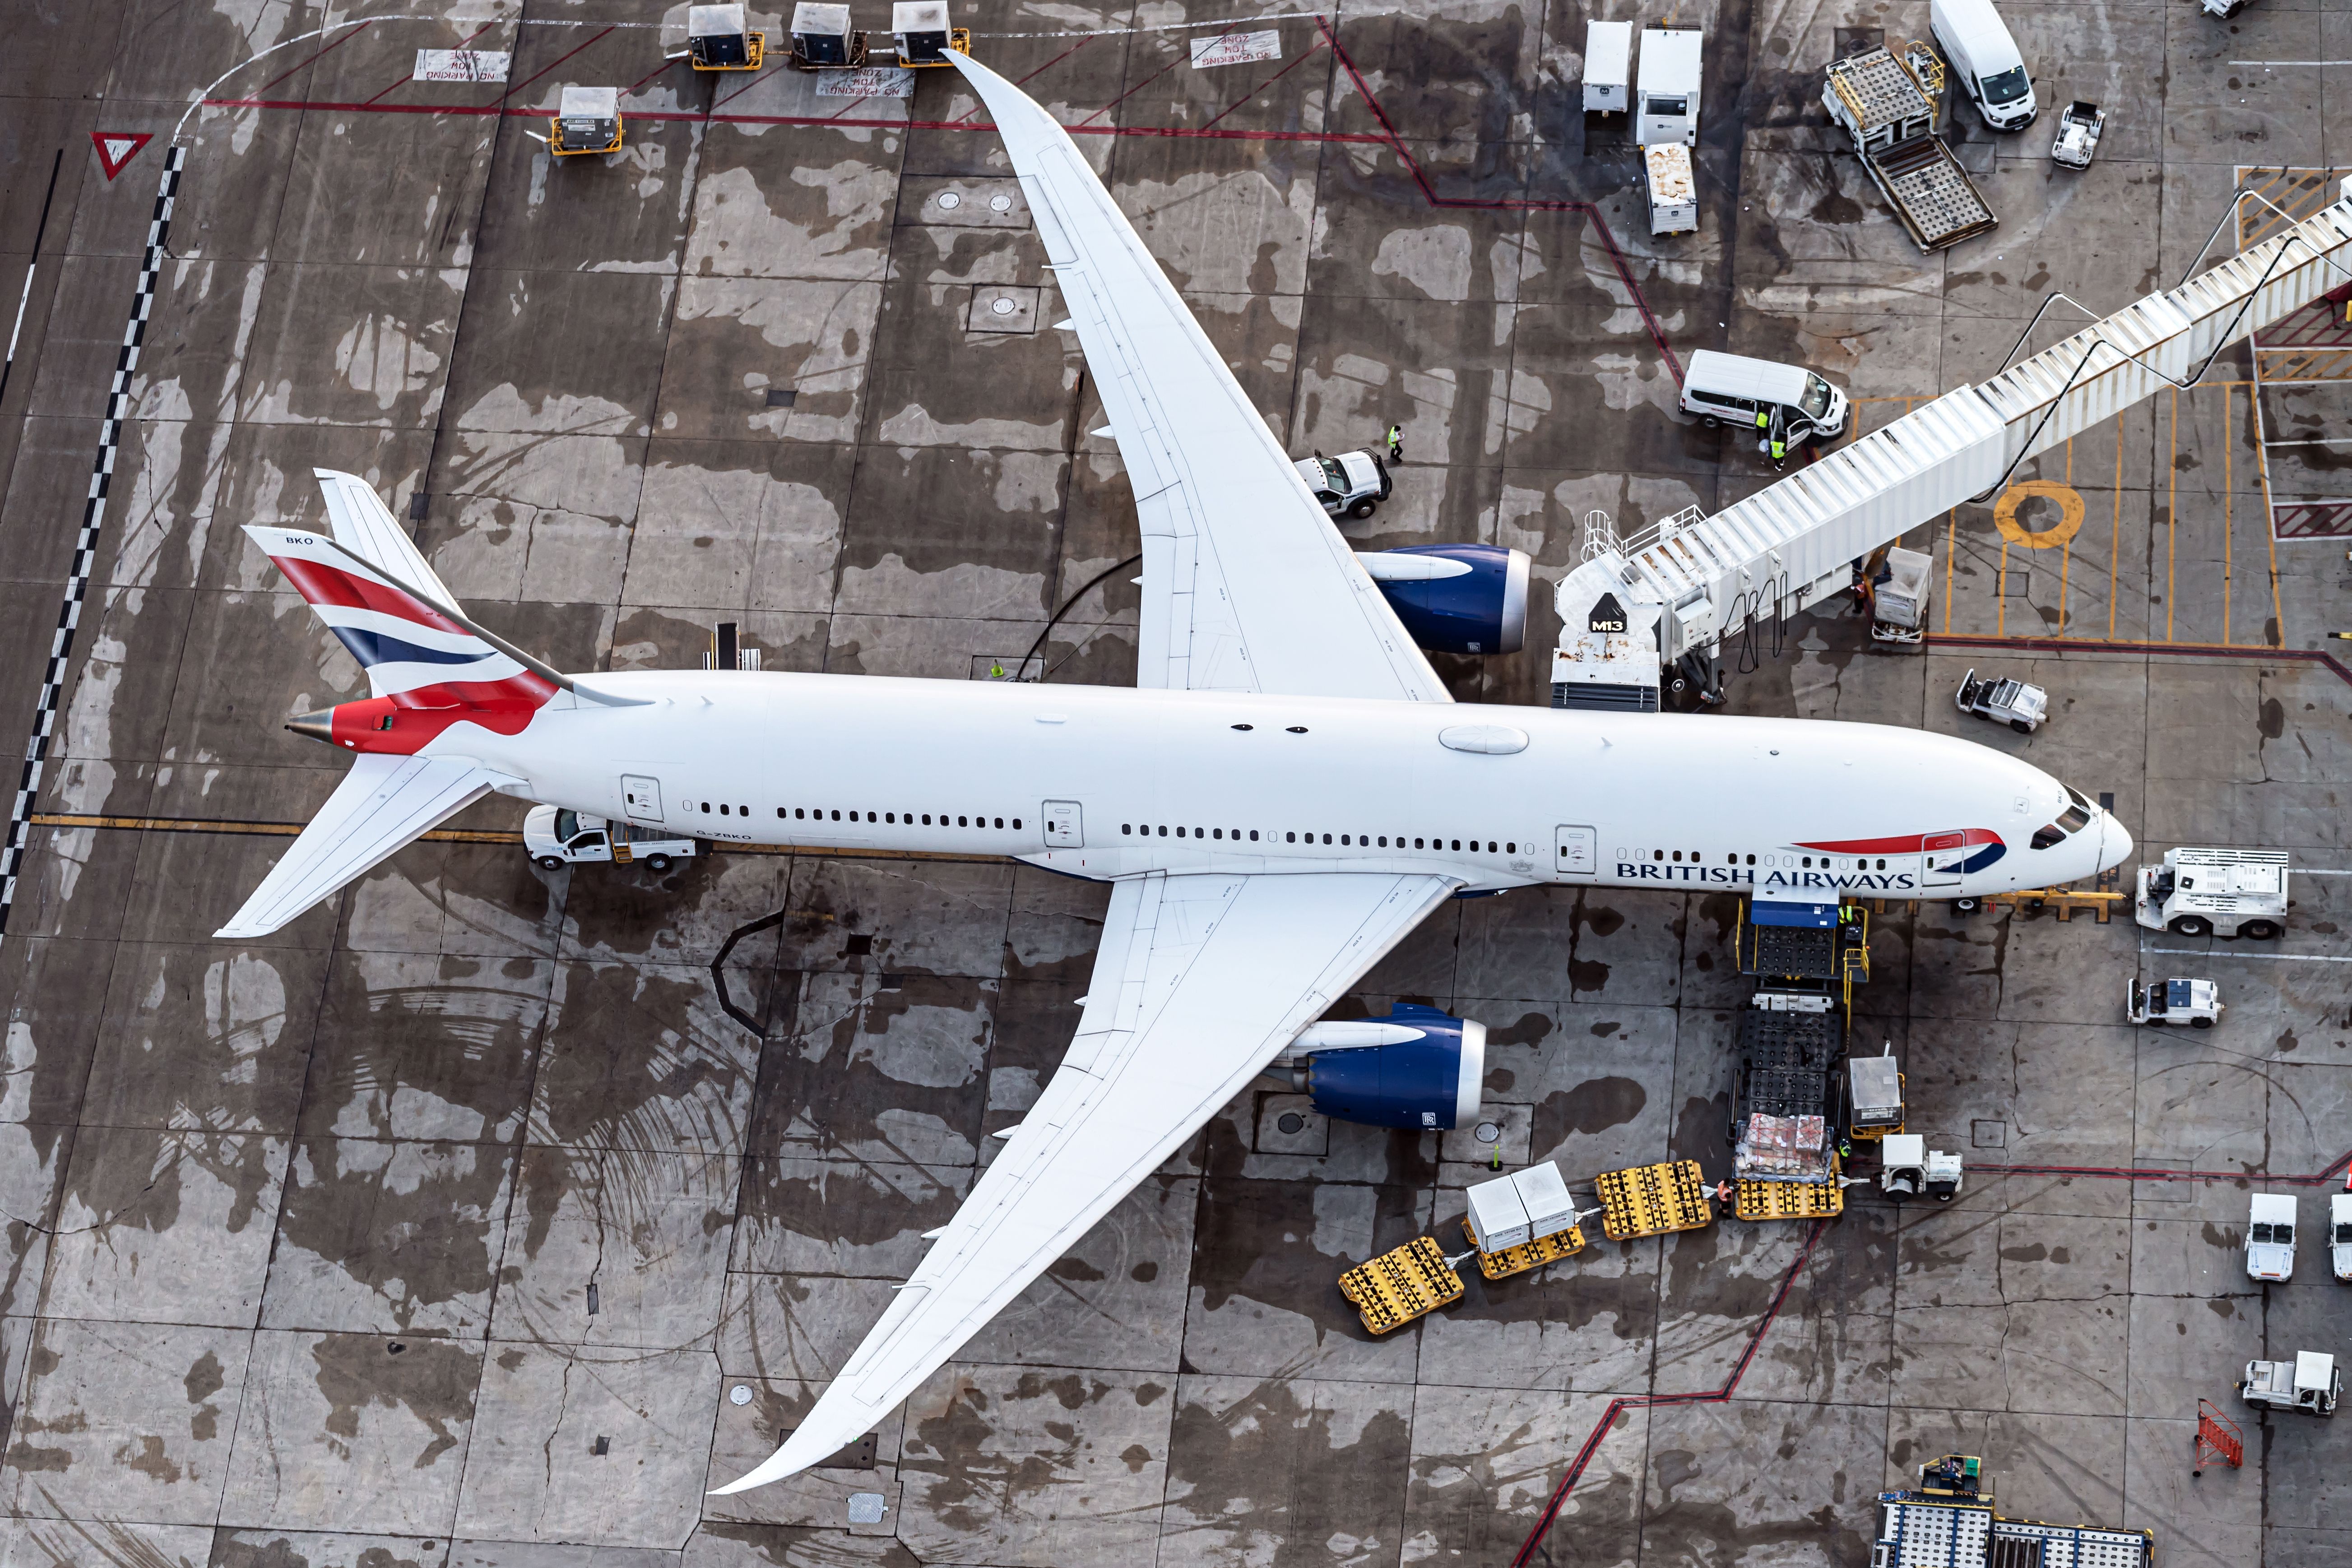 A British Airways Boeing 787 Dreamliner 9 can be seen from above, from a helicopter perspective. The plane is parked.